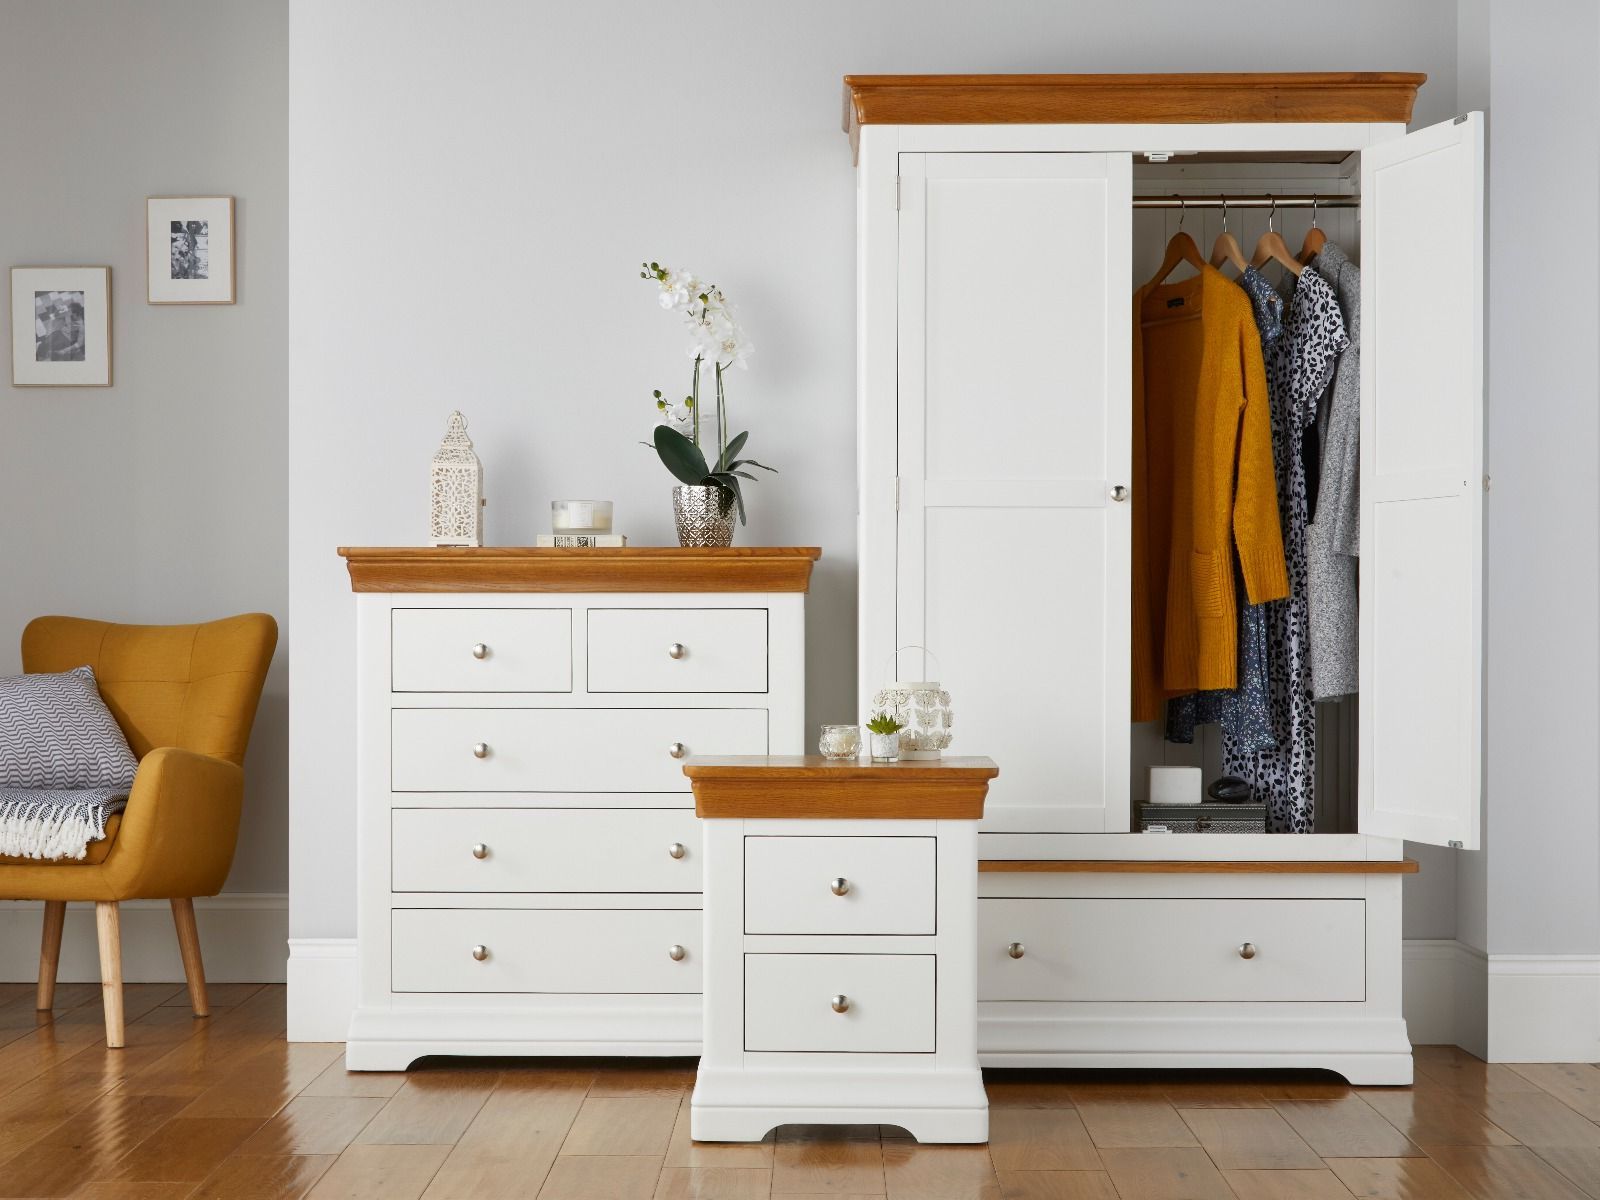 Farmhouse White Painted Oak Bedroom Set, Wardrobe, Chest Of Drawers And  Bedside Table Throughout Wardrobes Sets (View 16 of 21)